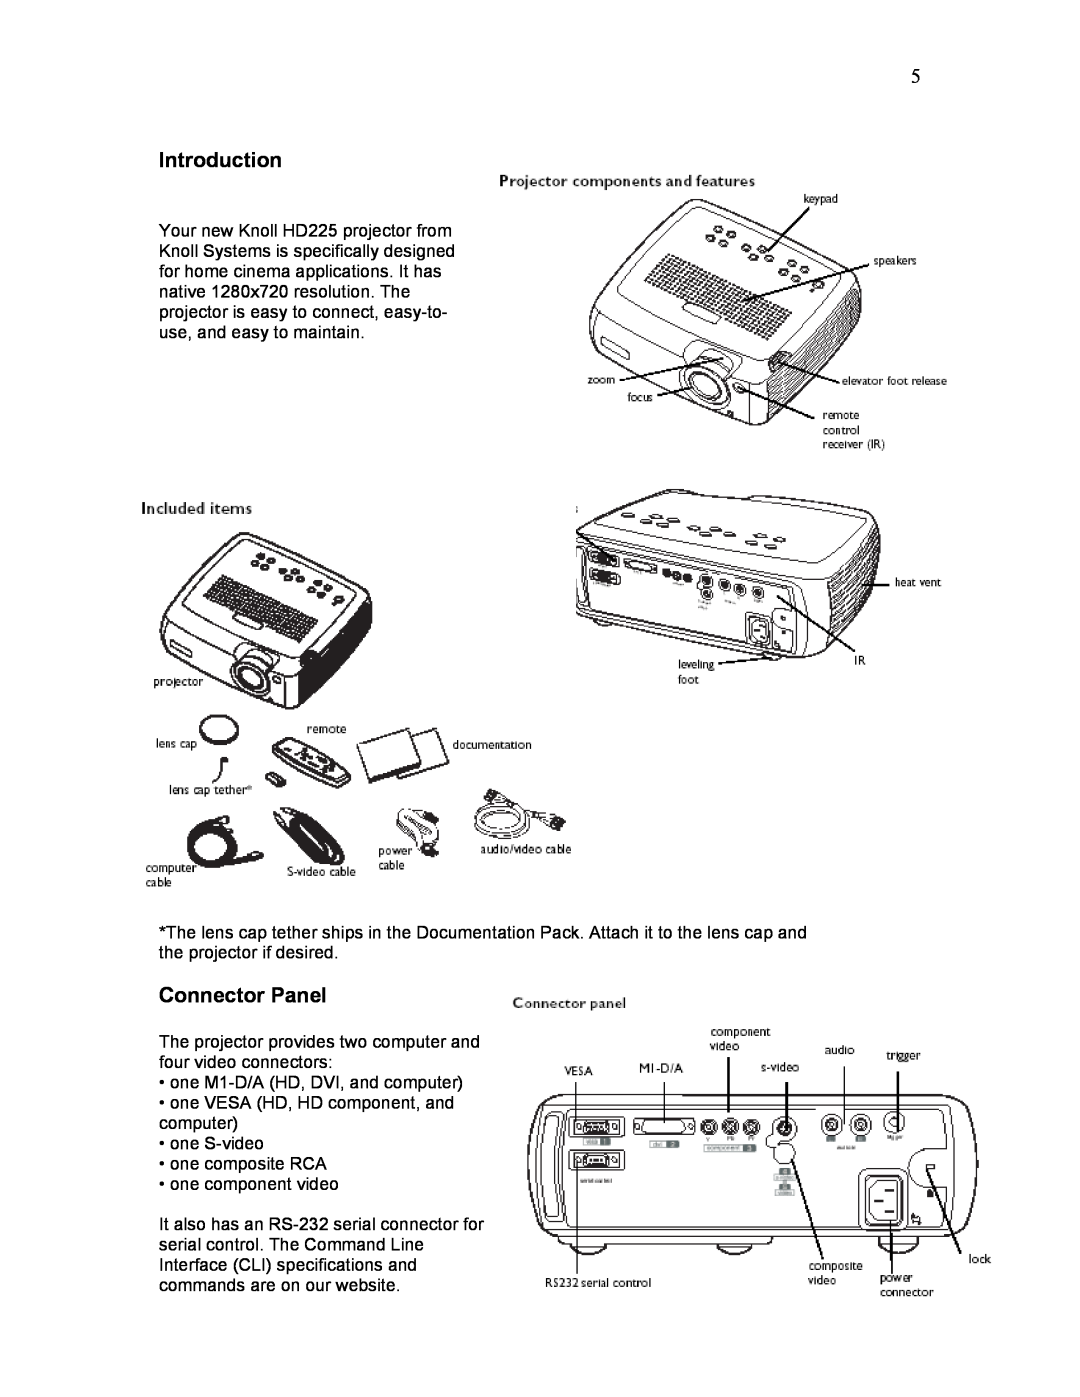 Knoll Systems HD225 user manual Introduction, Connector Panel 